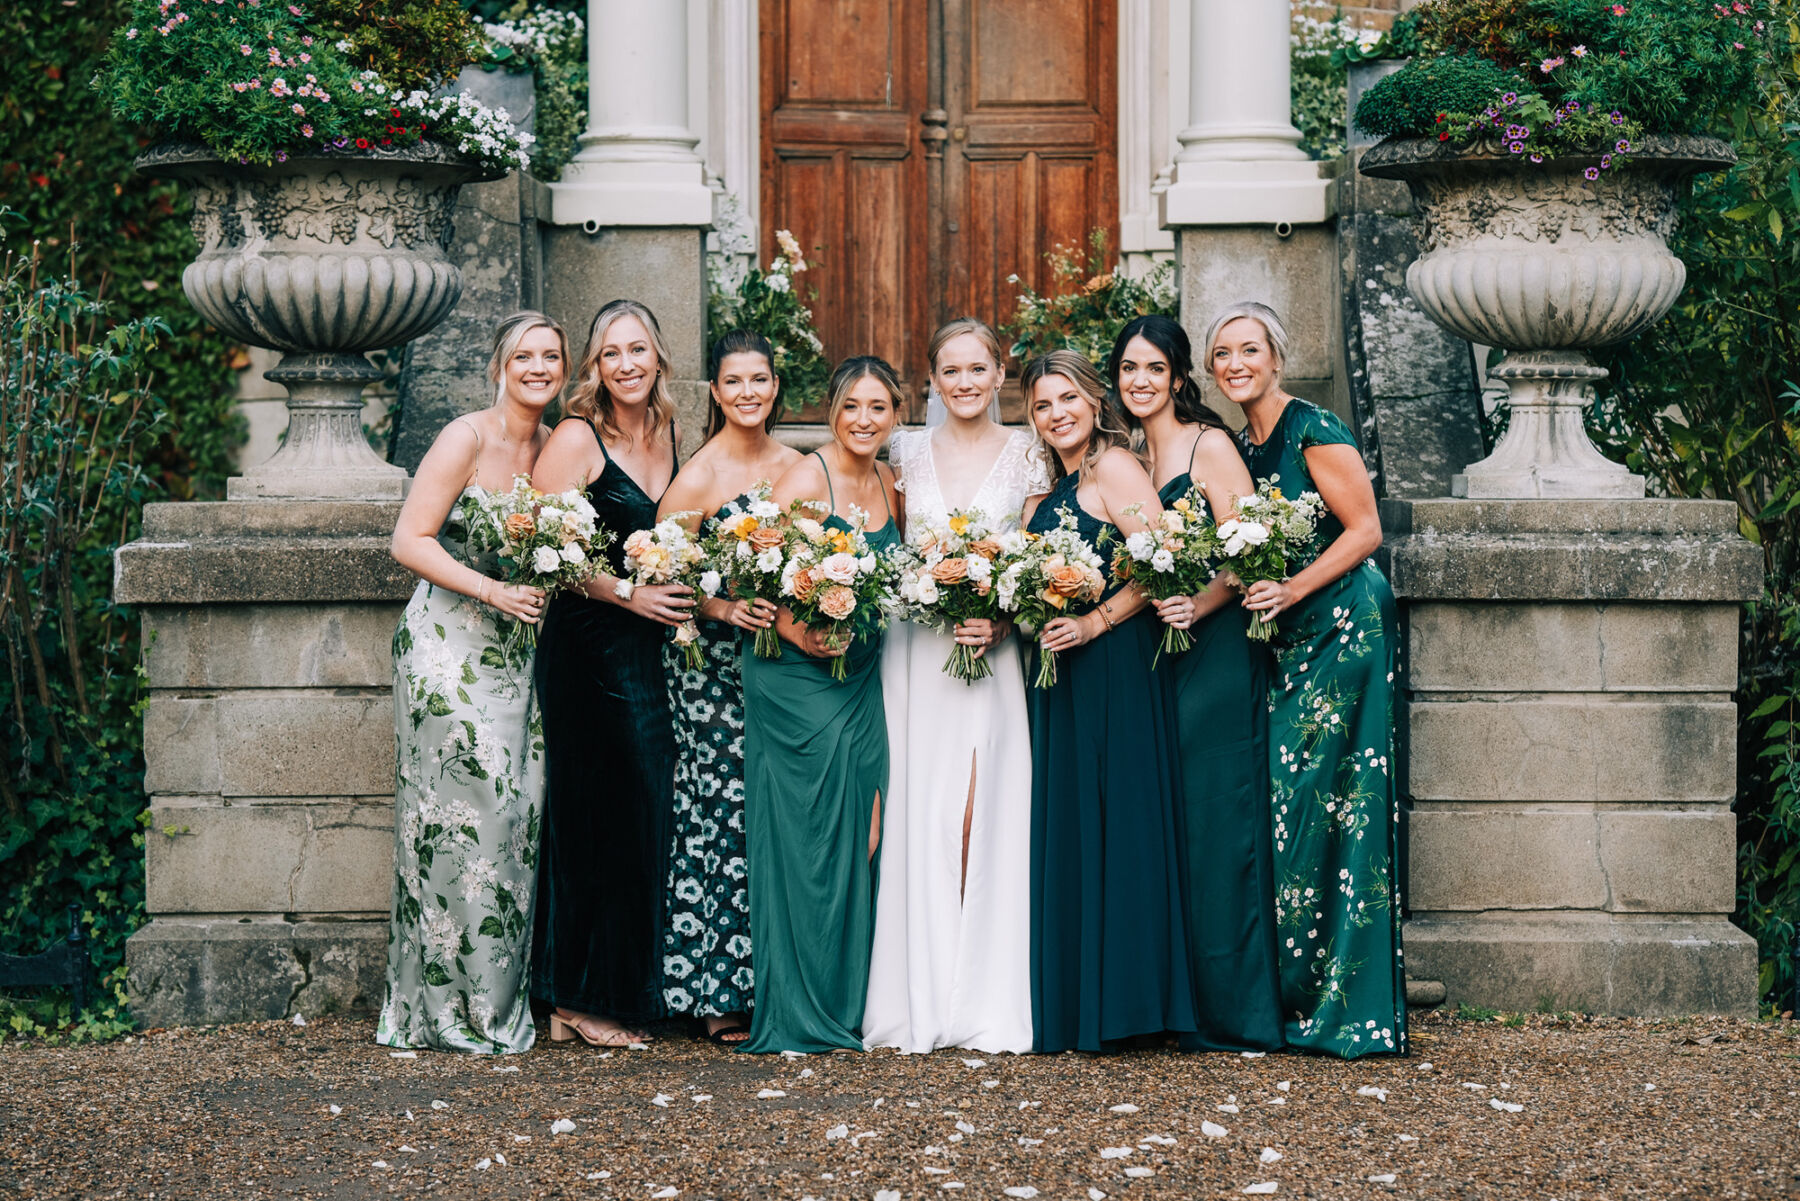 Bride wearing Rembo Styling wedding dress with her bridesmaids in various style green dresses. Hampton Court wedding.